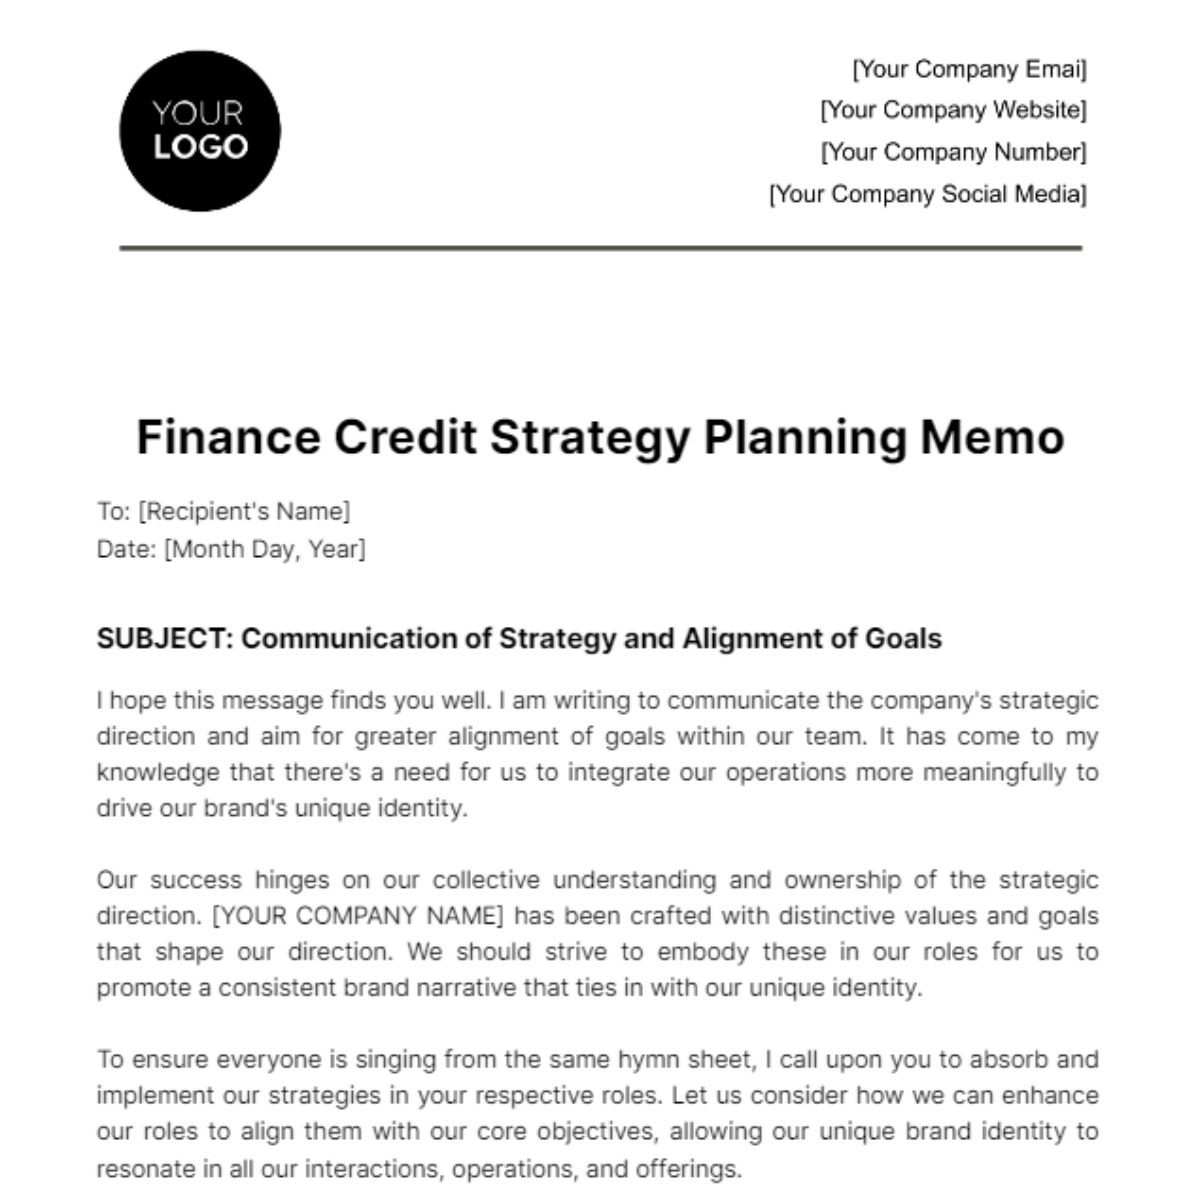 Free Finance Credit Strategy Planning Memo Template